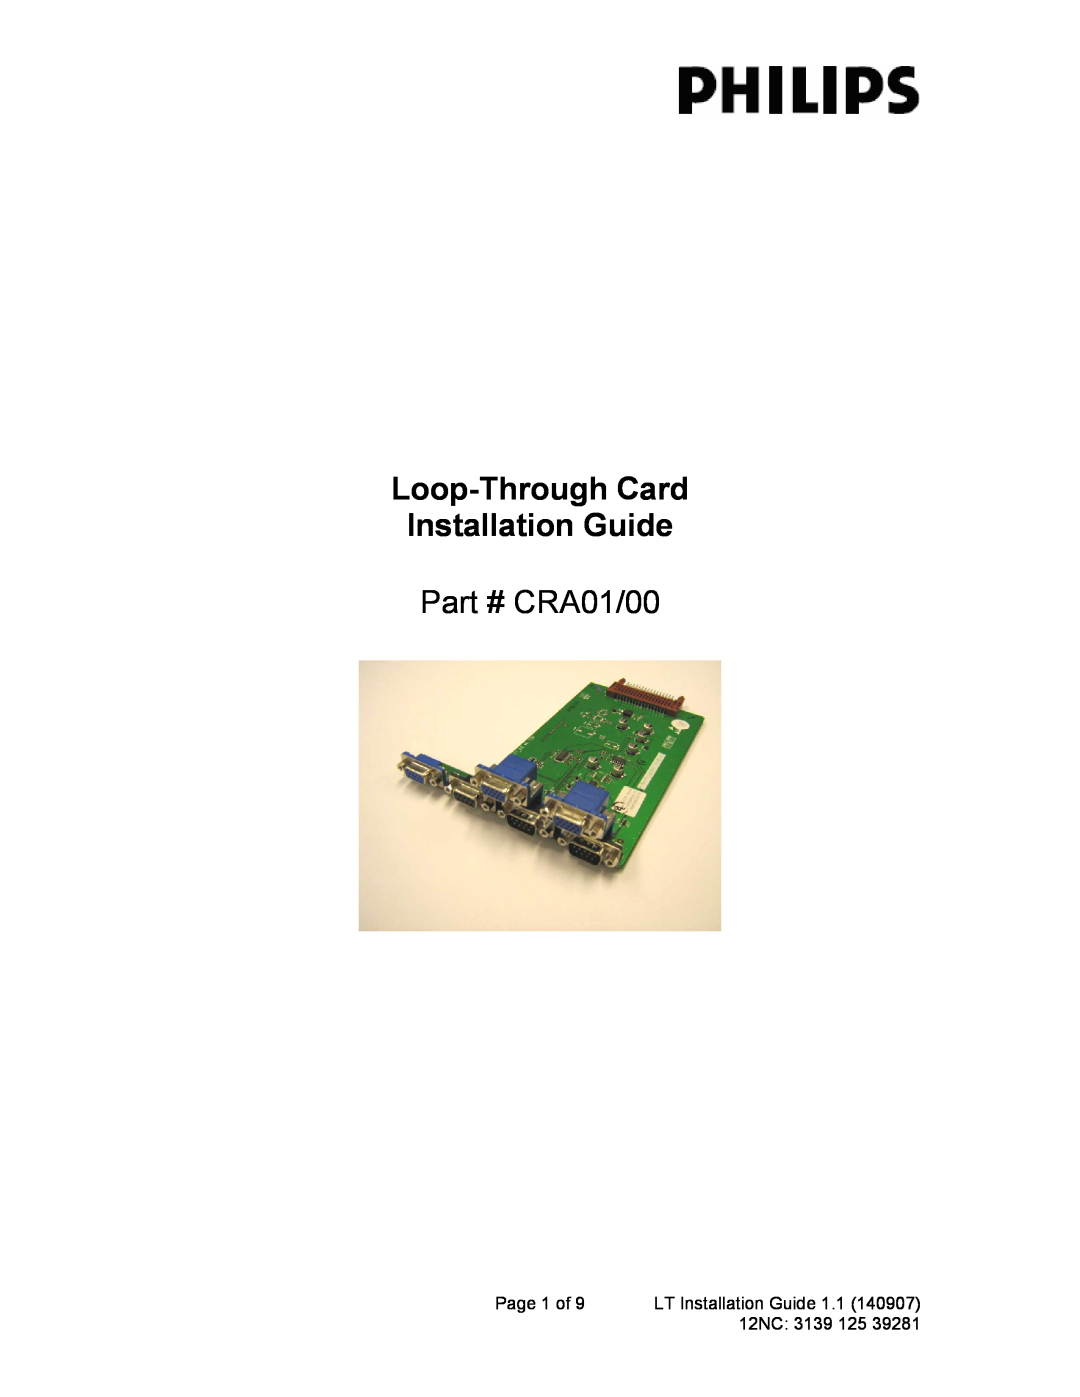 Philips CRA01/00 manual Loop-Through Card Installation Guide 